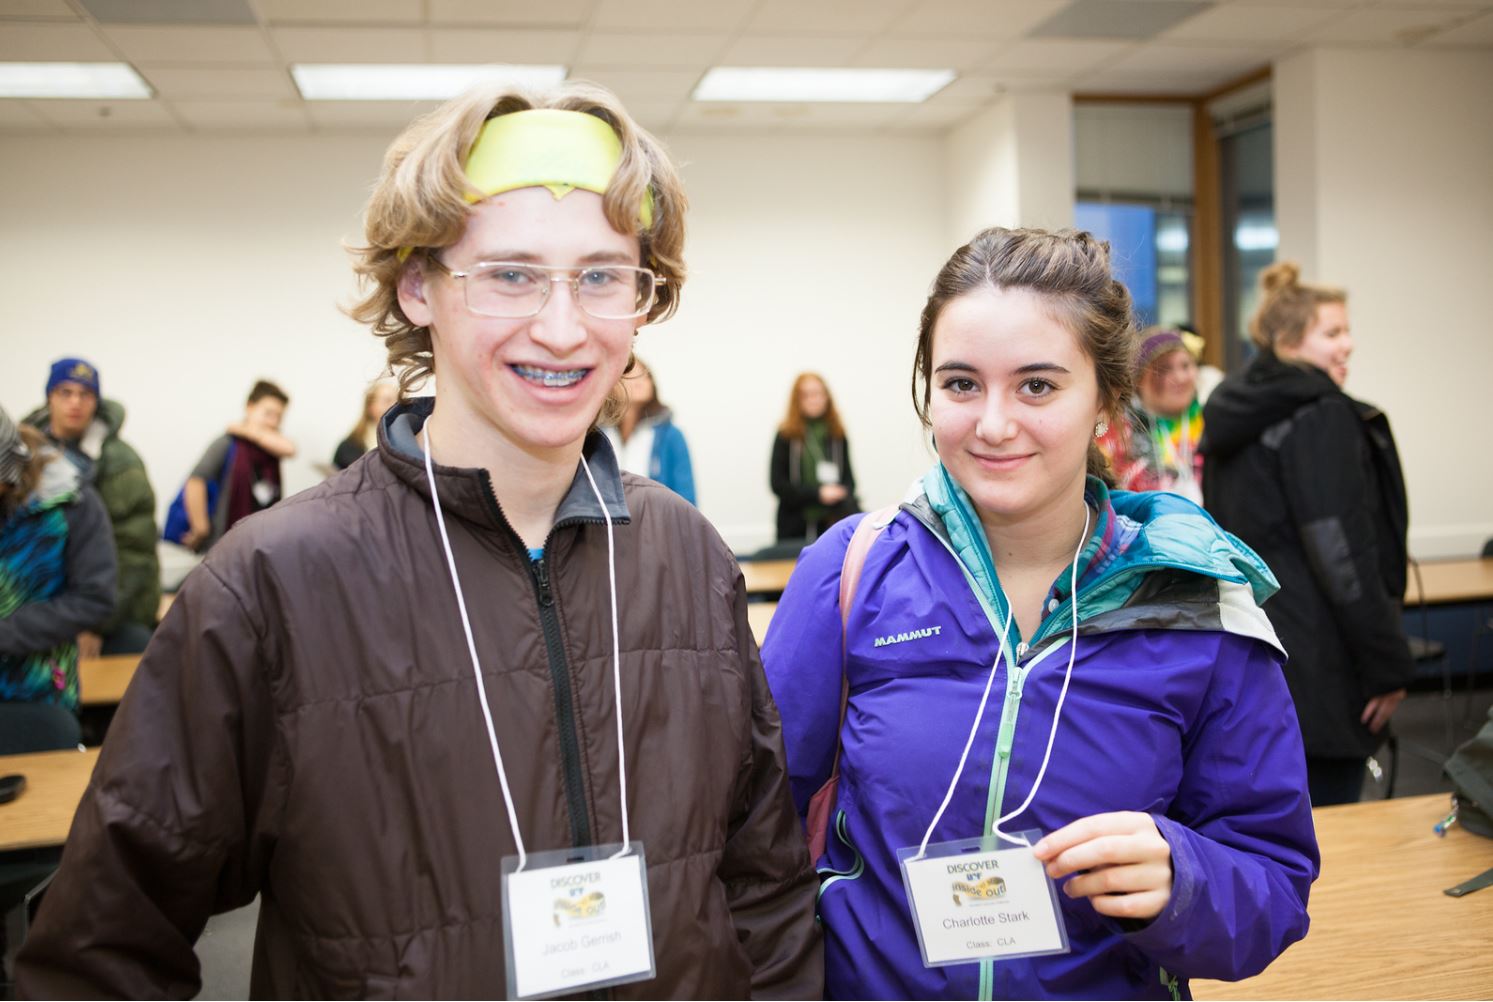 Students Jacob Gerrish and Charlotte Stark flash their name badges after a mock philosophy class durin Discover UAF's InsideOut program in late October 2012.